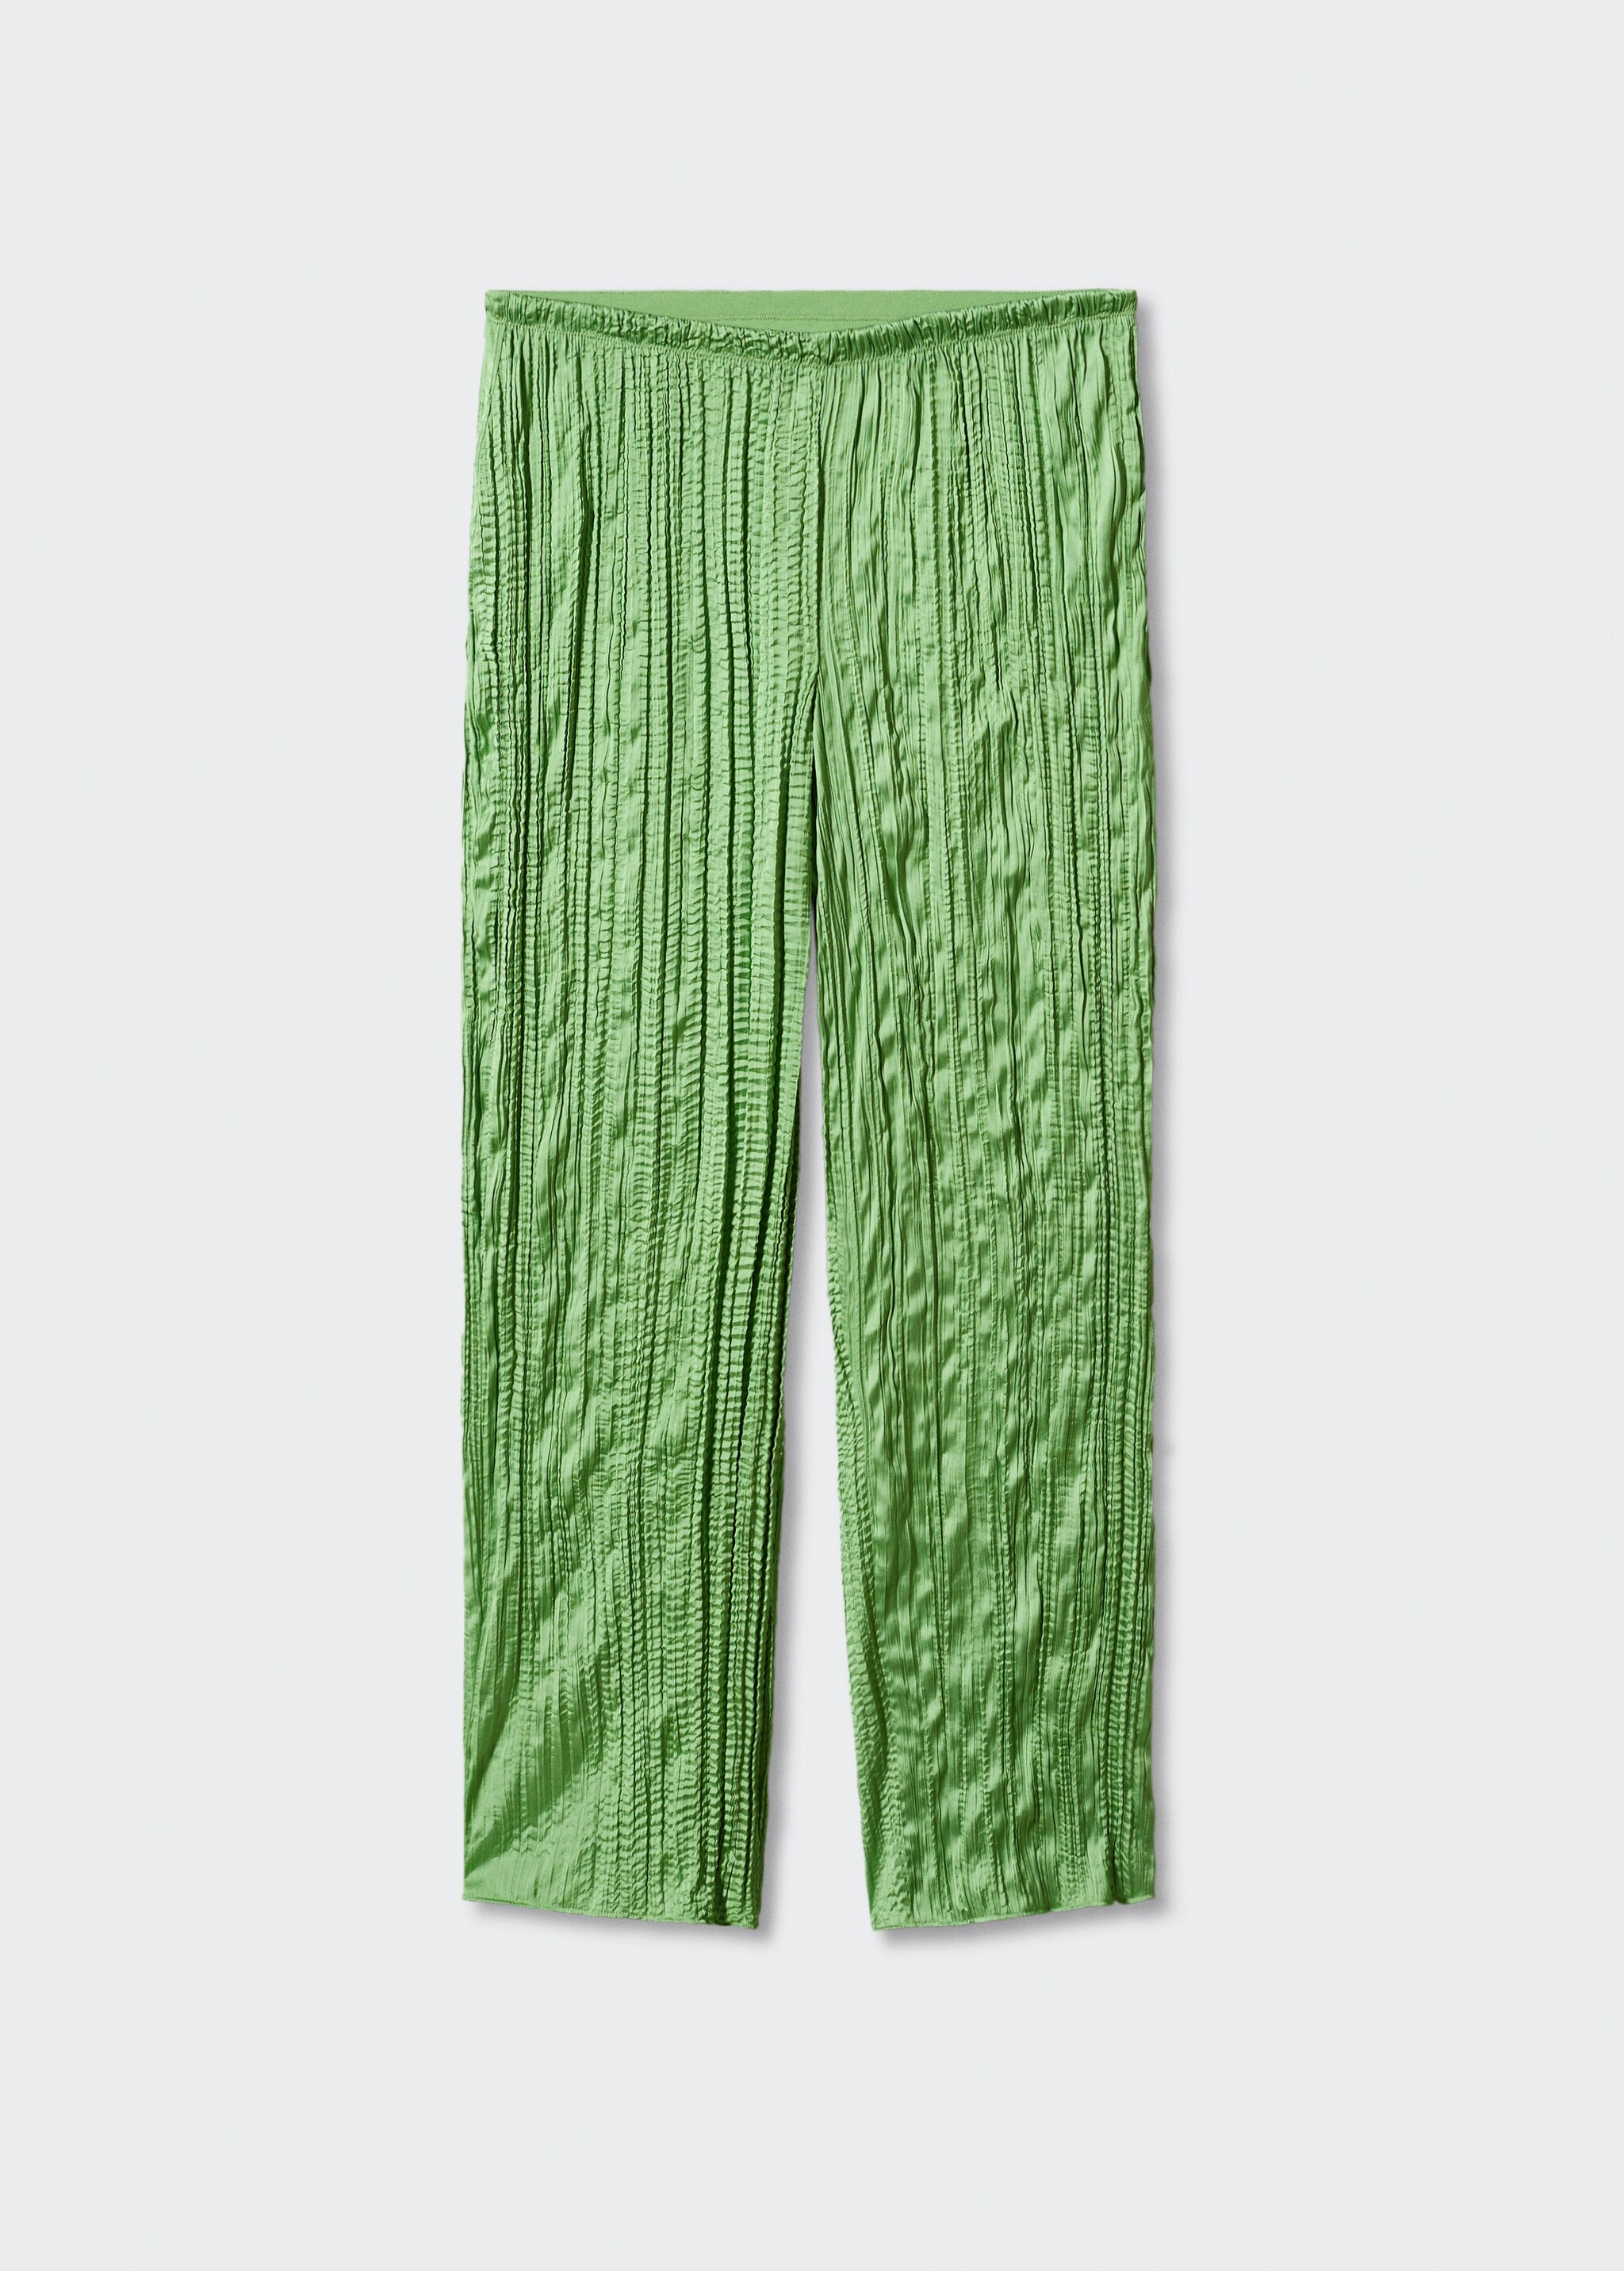 Satin pleated trousers - Article without model